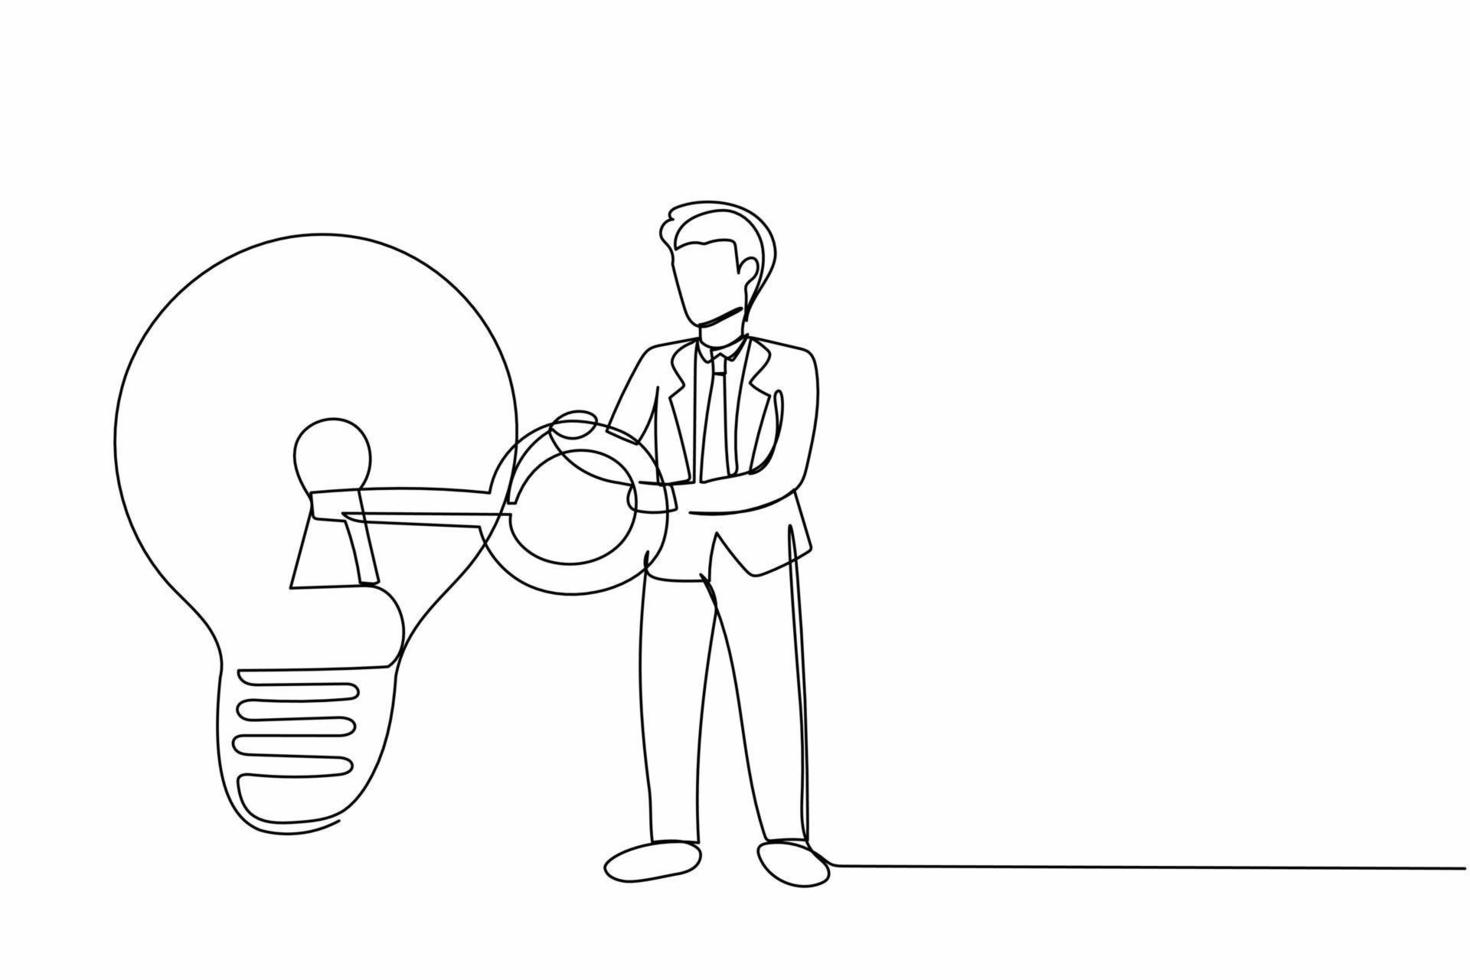 Continuous one line drawing businessman putting big key into light bulb. Unlock new business idea, invent new product or creative thoughts concept. Single line draw design vector graphic illustration